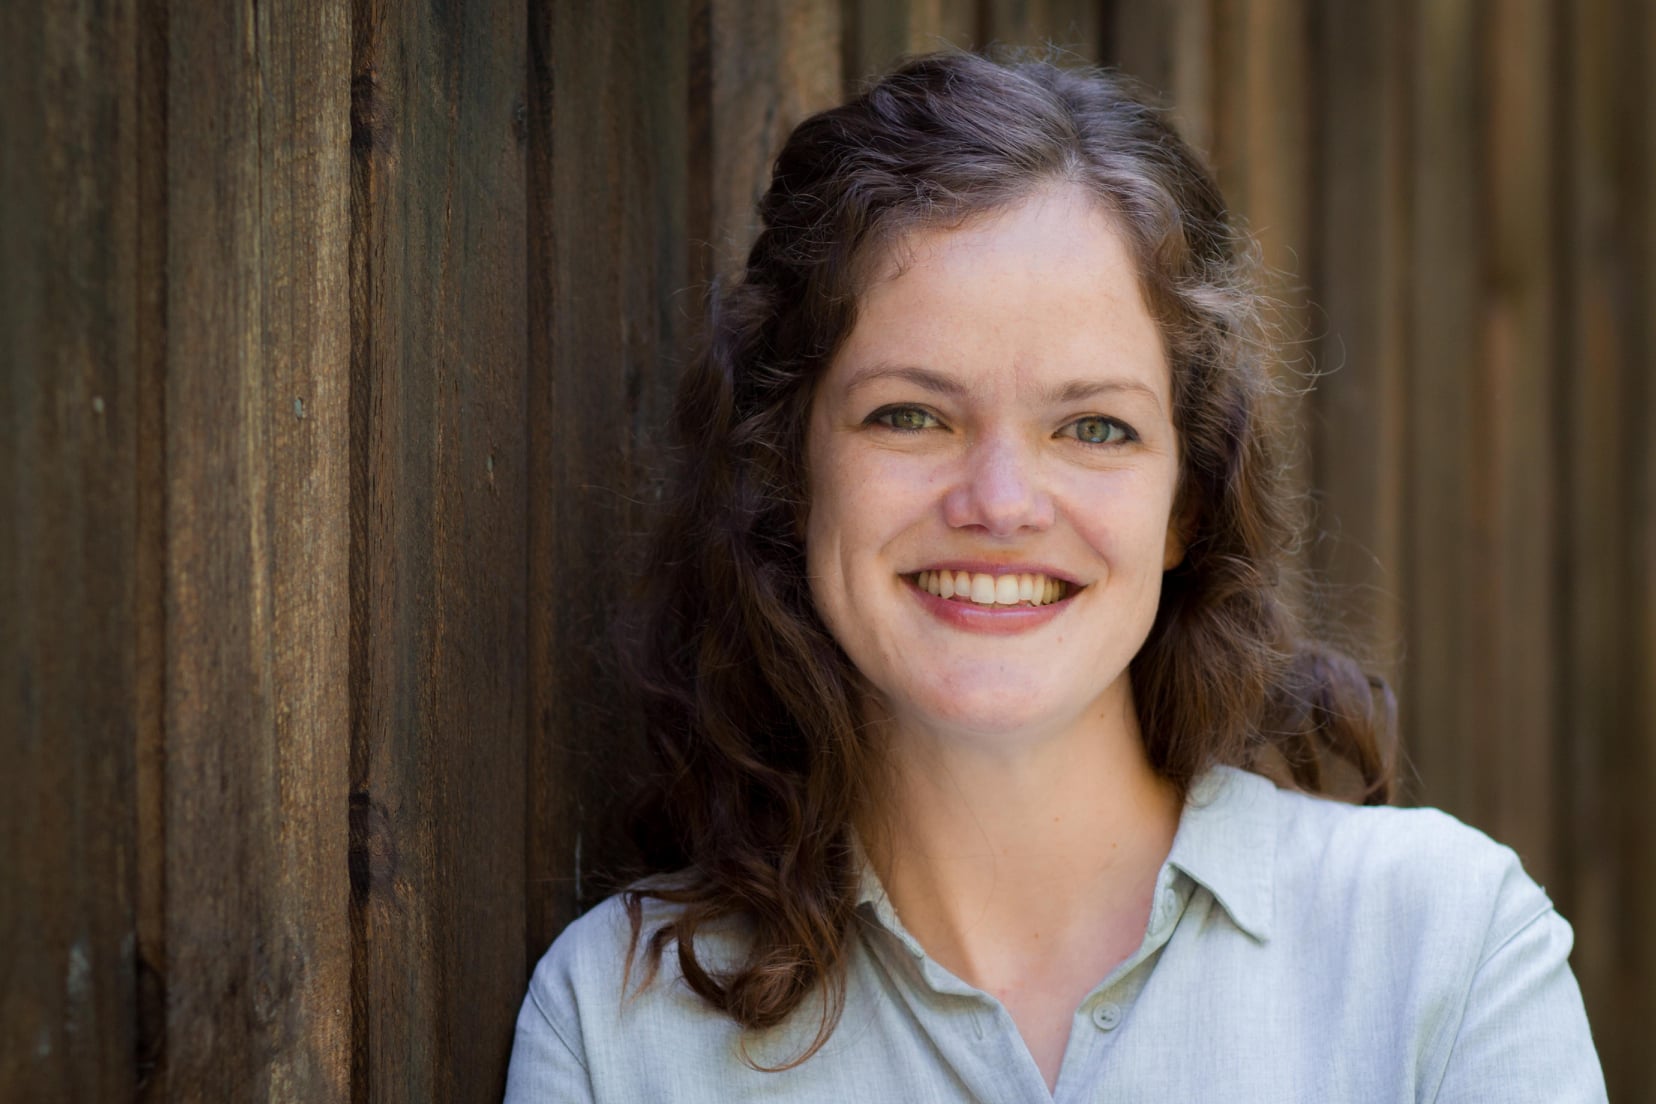 Rachel Worthington
Senior Program Manager,
Vermont Foodbank

“My Experience In Anti-hunger Work Has Only Heightened My Awareness That Our Food System Is In Crisis And Reinforced My Commitment To Finding Solutions For Food System Sustainability, Equity, And Resilience.”